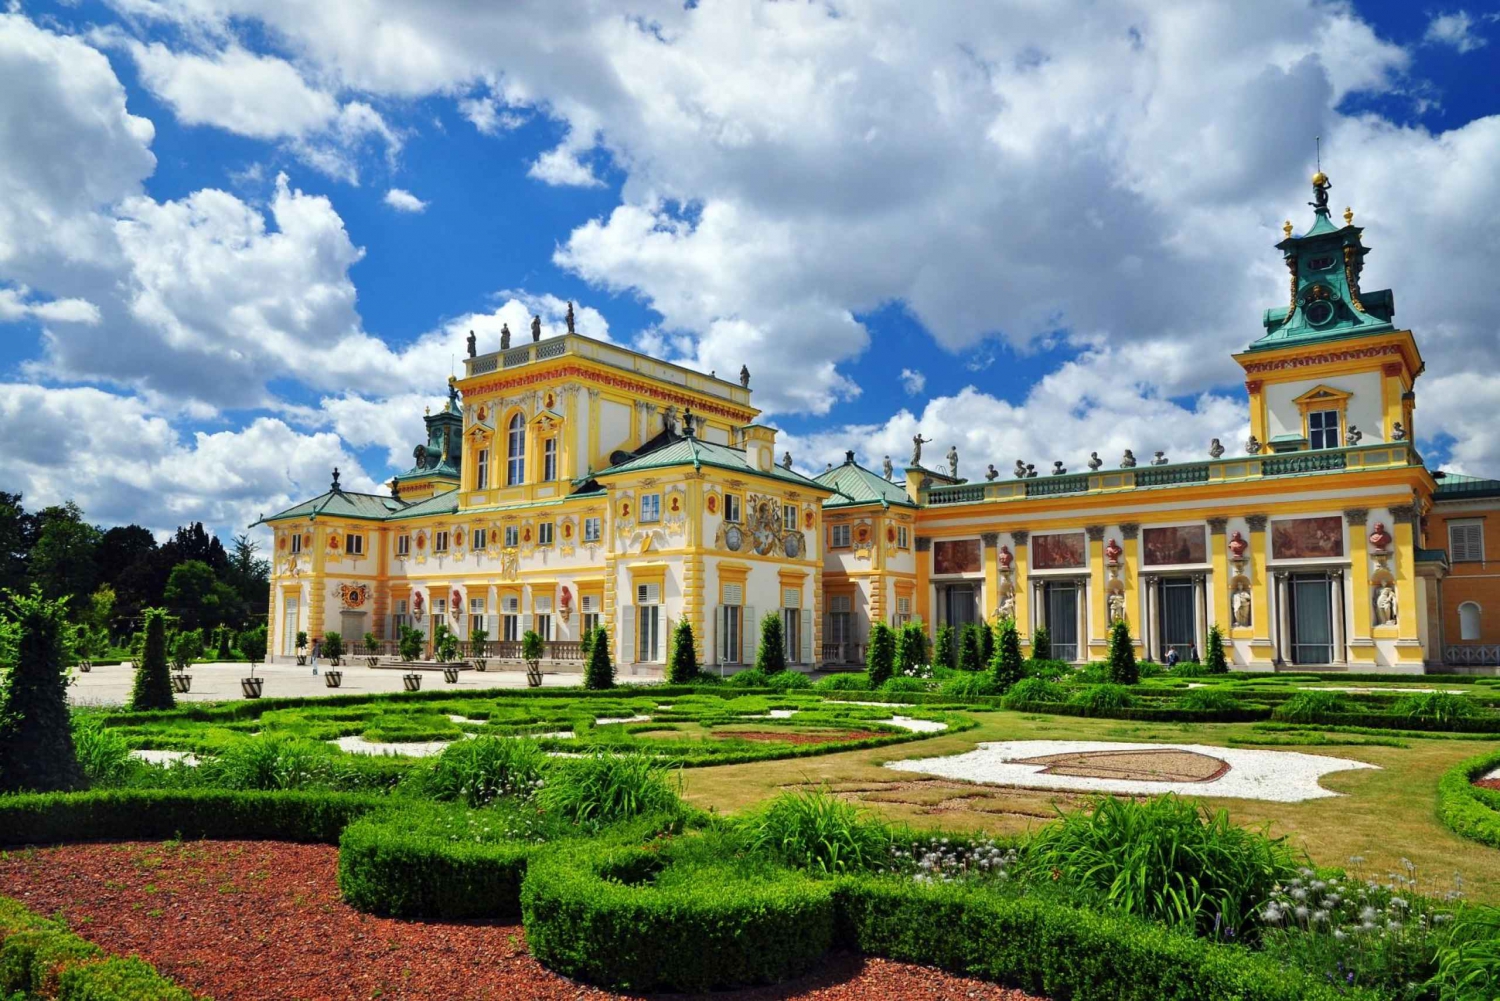 Private Full-Day Tour of Warsaw with Tickets and Transfers